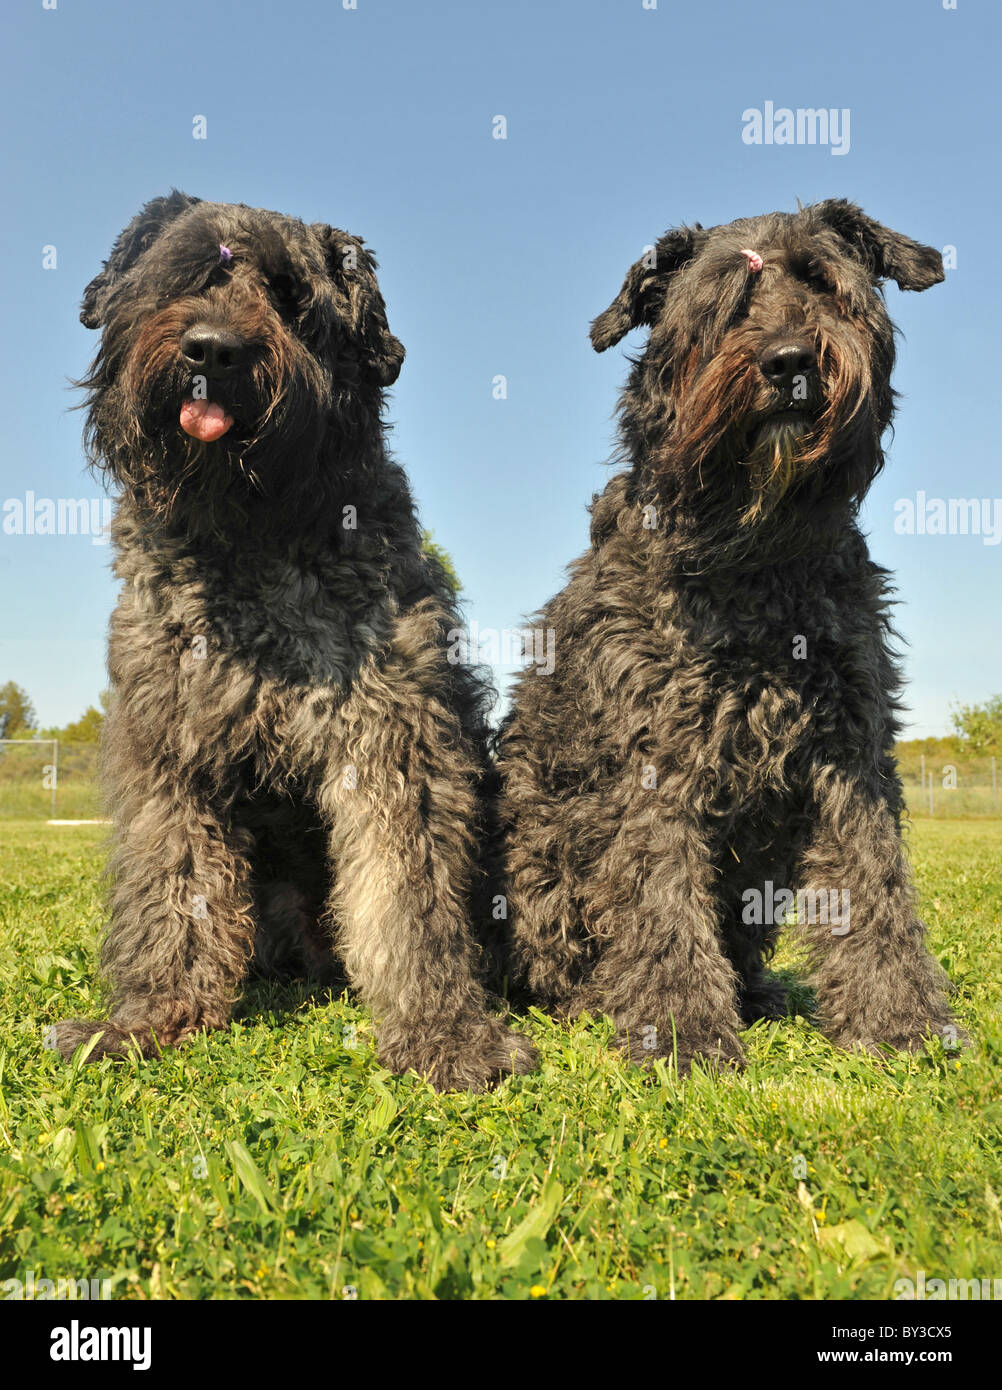 two dogs 'bouvier des Flandres' sitting in a field Stock Photo